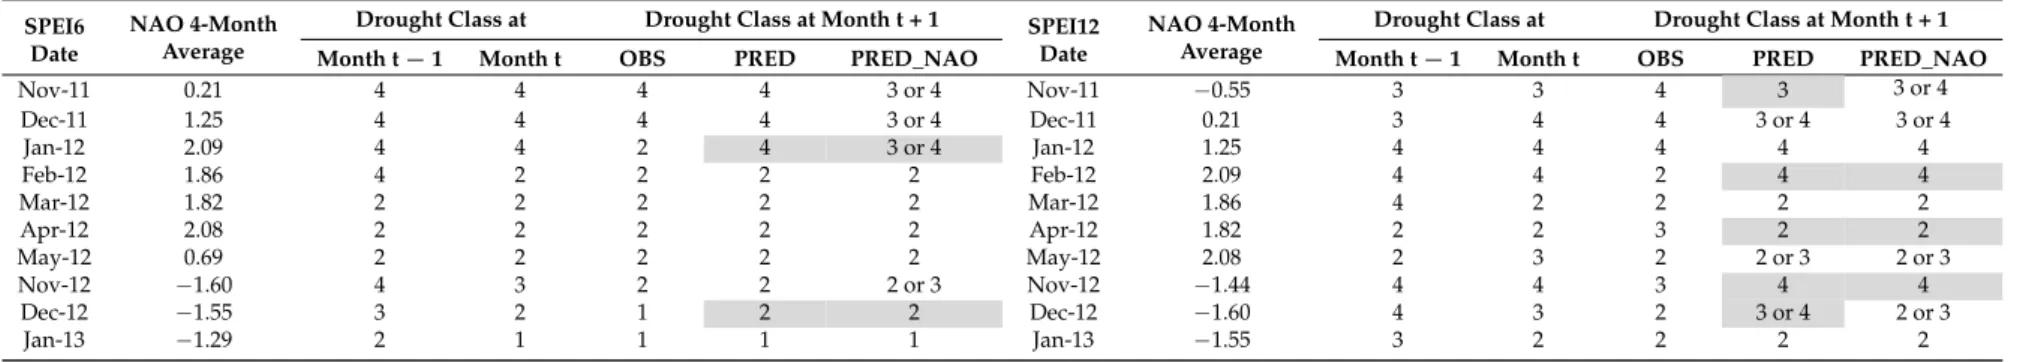 Table 7. The SPEI6 and SPEI12: Comparison between observed (OBS) and predicted drought class transitions (“PRED” and “PRED_NAO”) for grid point 13 (Table 3) during the periods November 2011 to May 2012, November 2012 to May 2013, and November 2013 to Decem